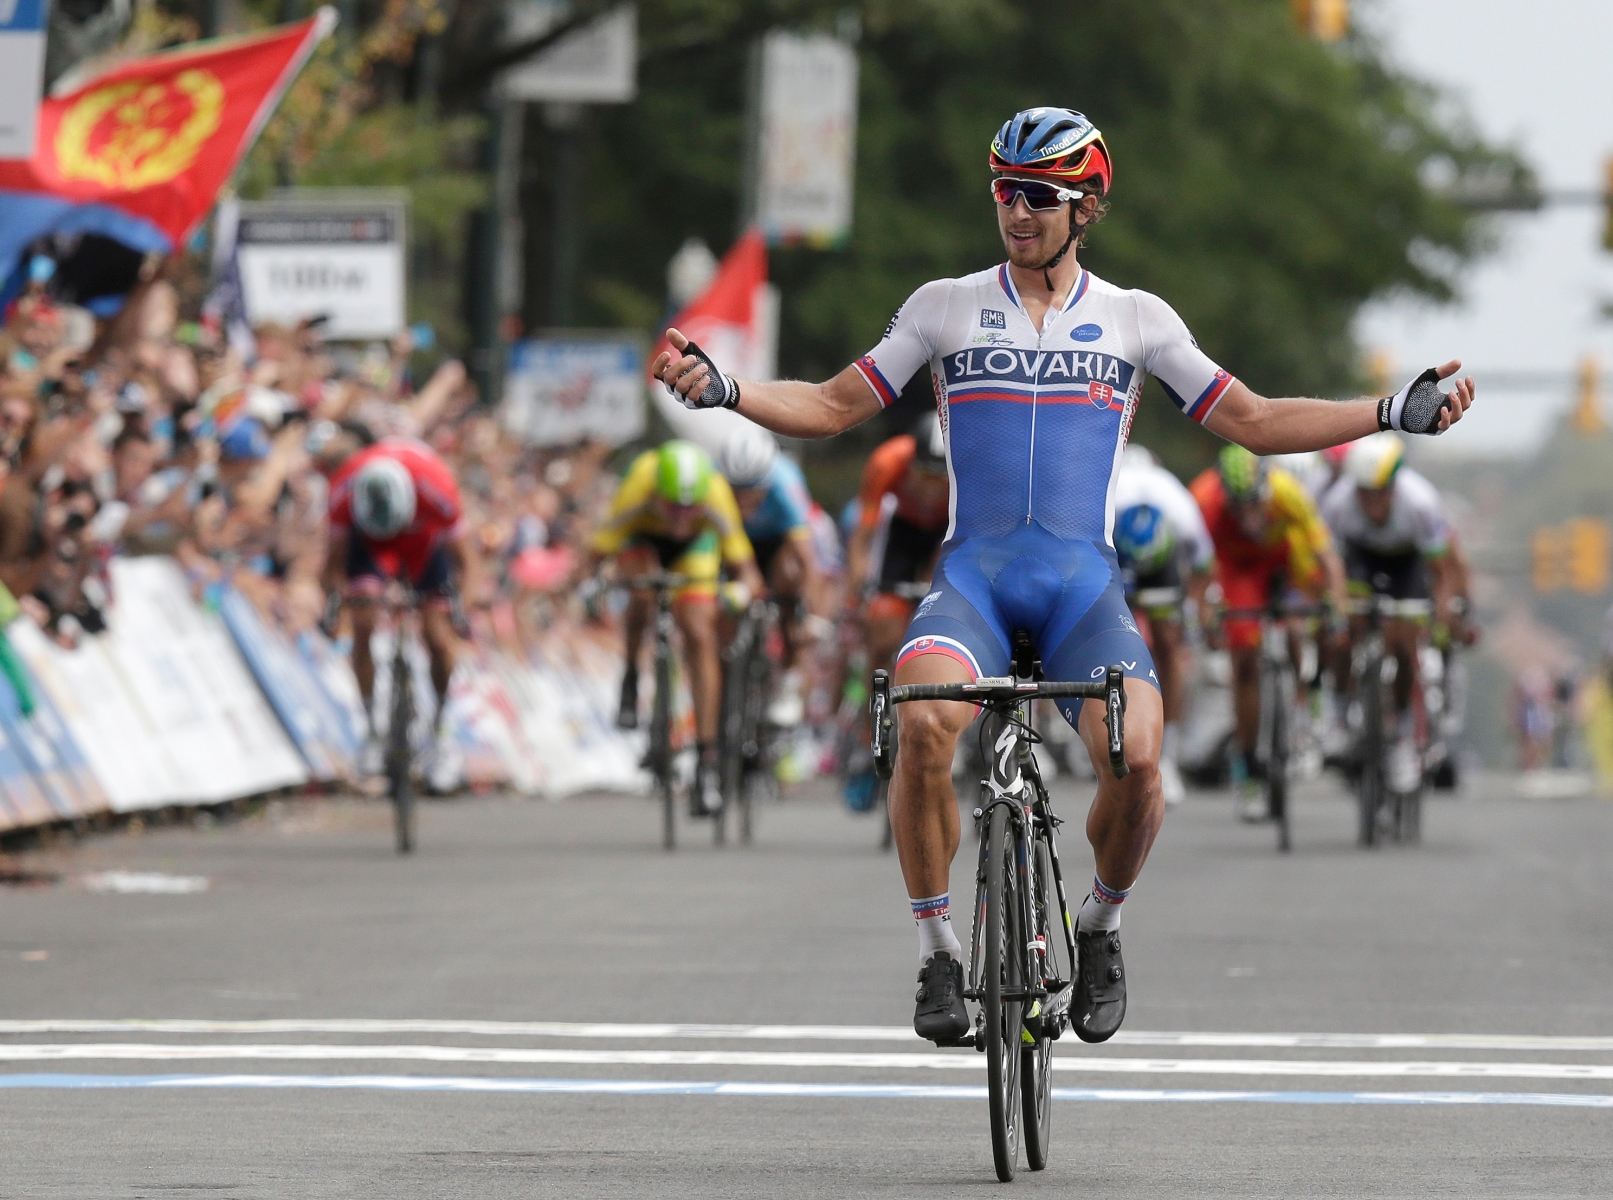 Peter Sagan, of Slovakia, reacts as he crosses the finish line to win the men's elite road circuit race in the UCI Road World Championships cycling races in Richmond, Va., Sunday, Sept. 27, 2015. (AP Photo/Gerry Broome) World Championships Cycling